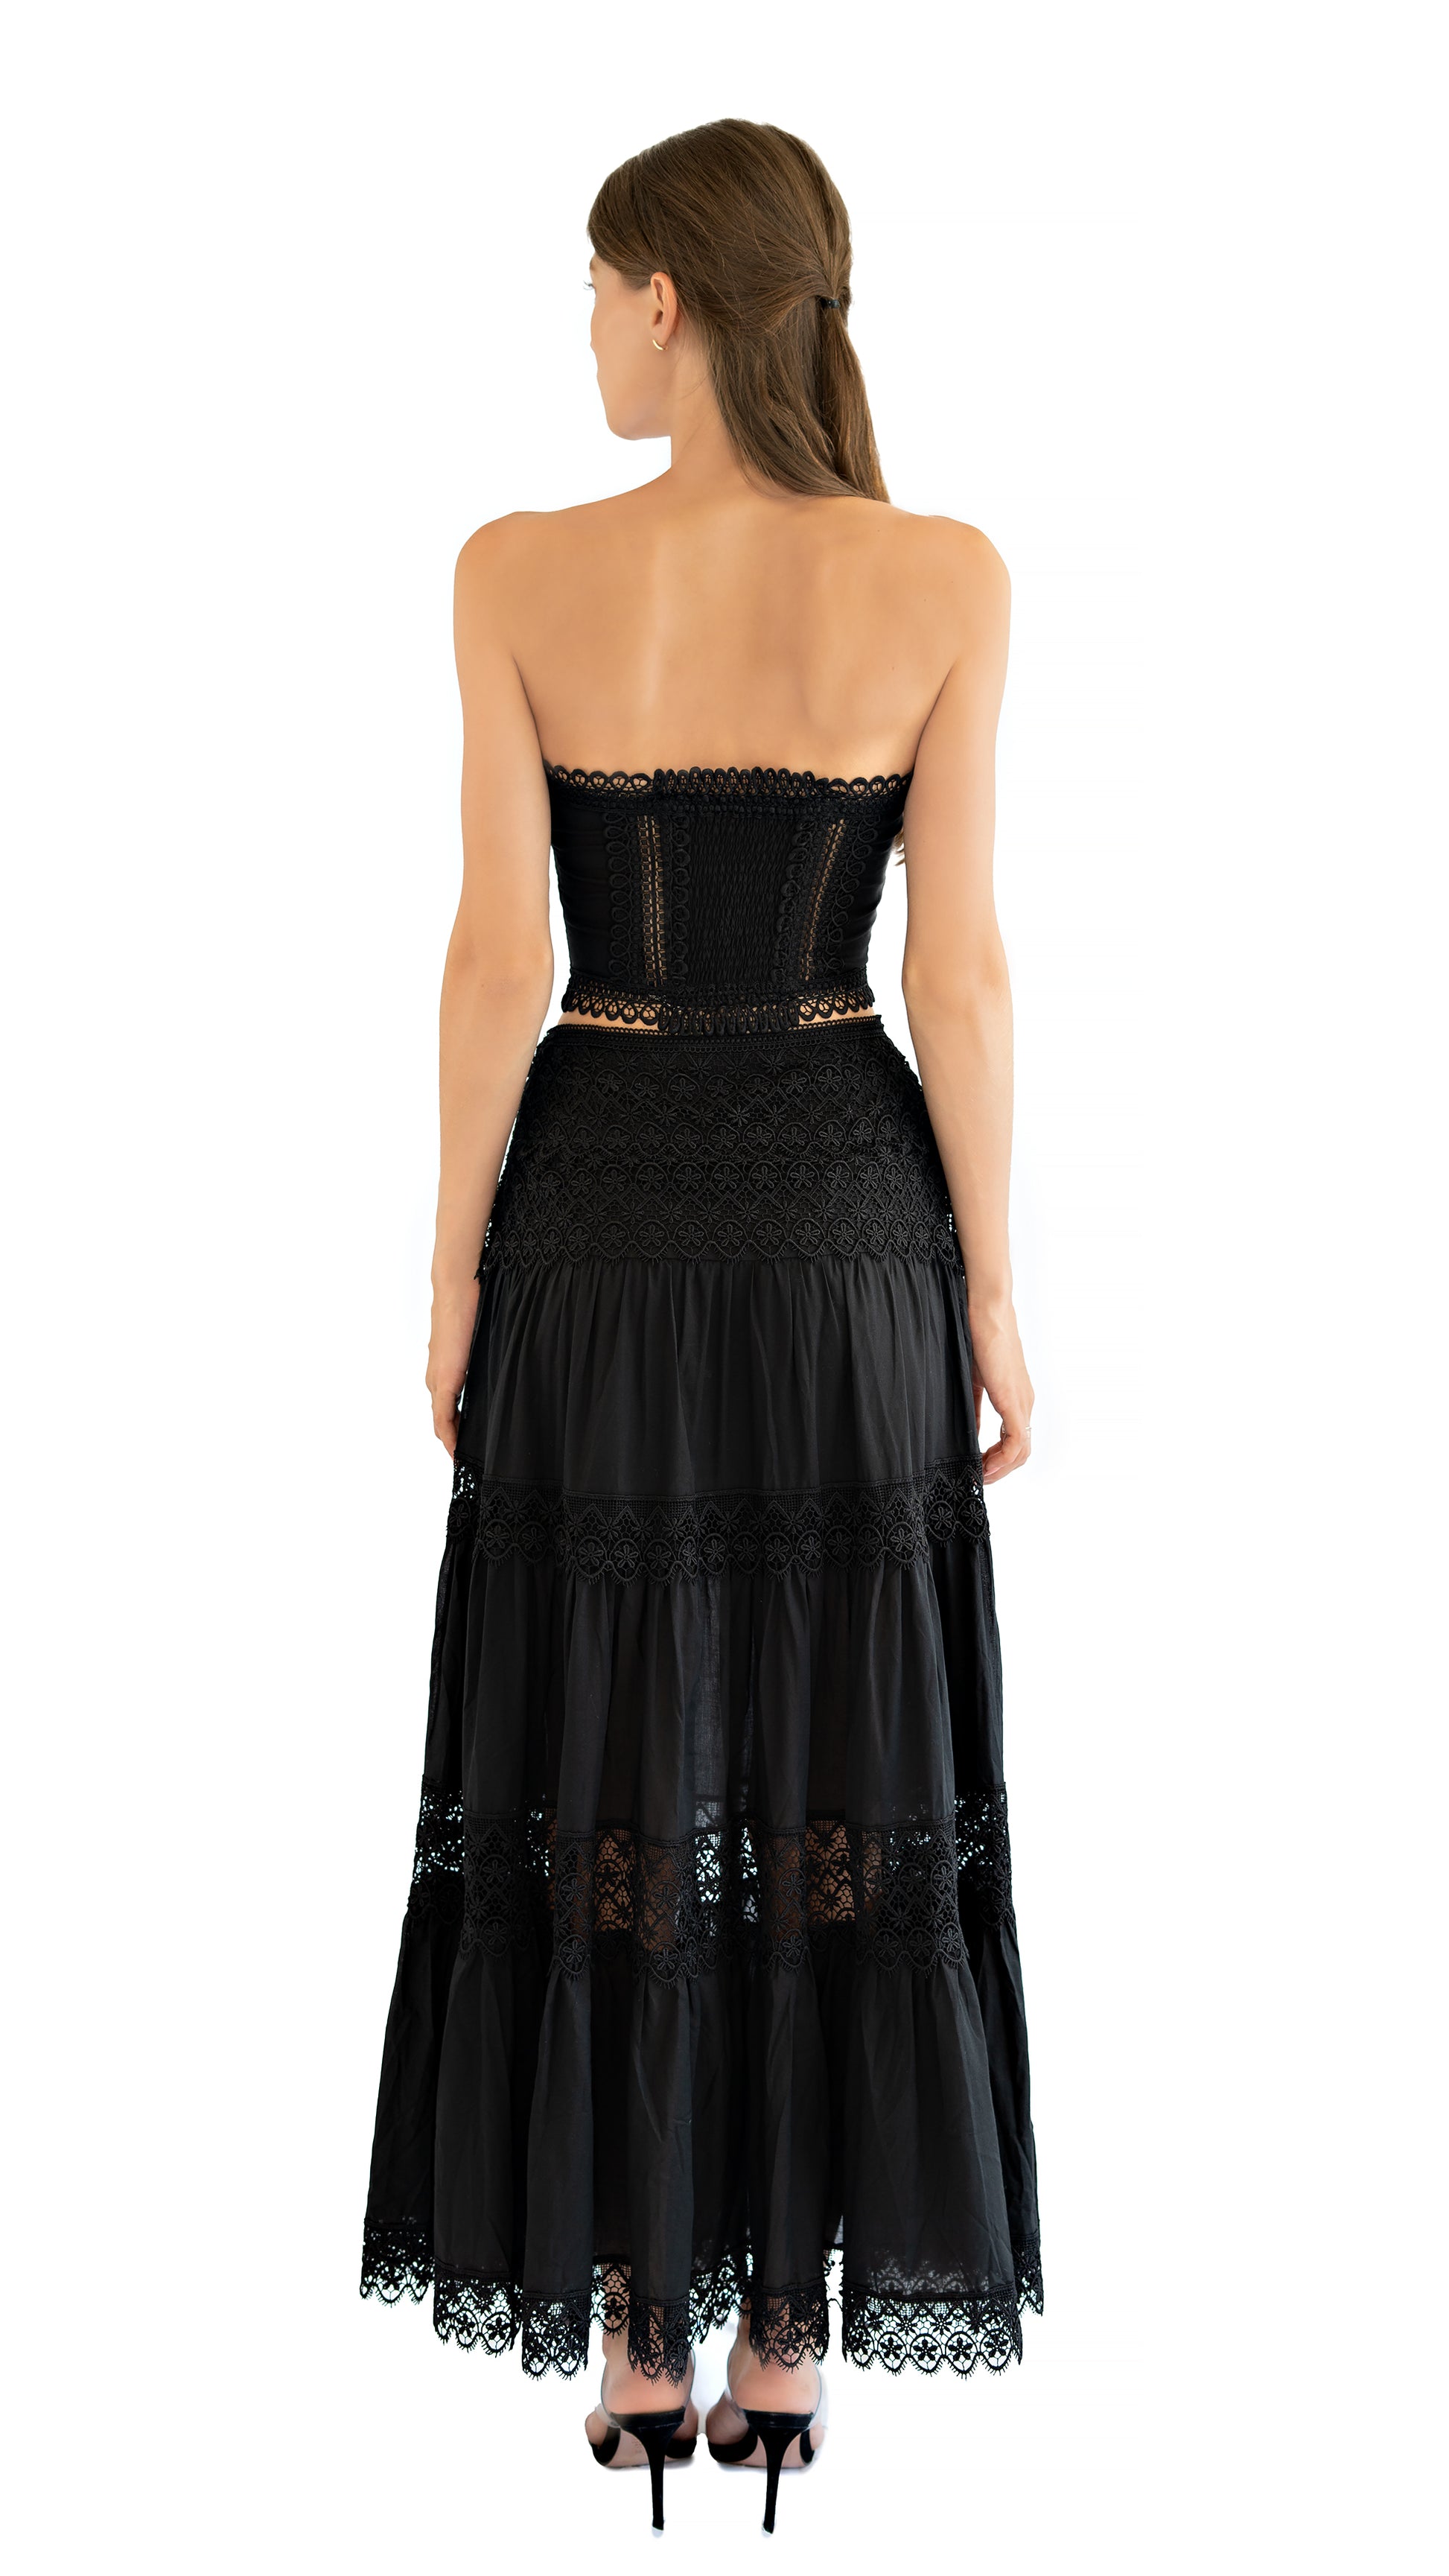 Charo Ruiz Lys strapless bustier with lace in black